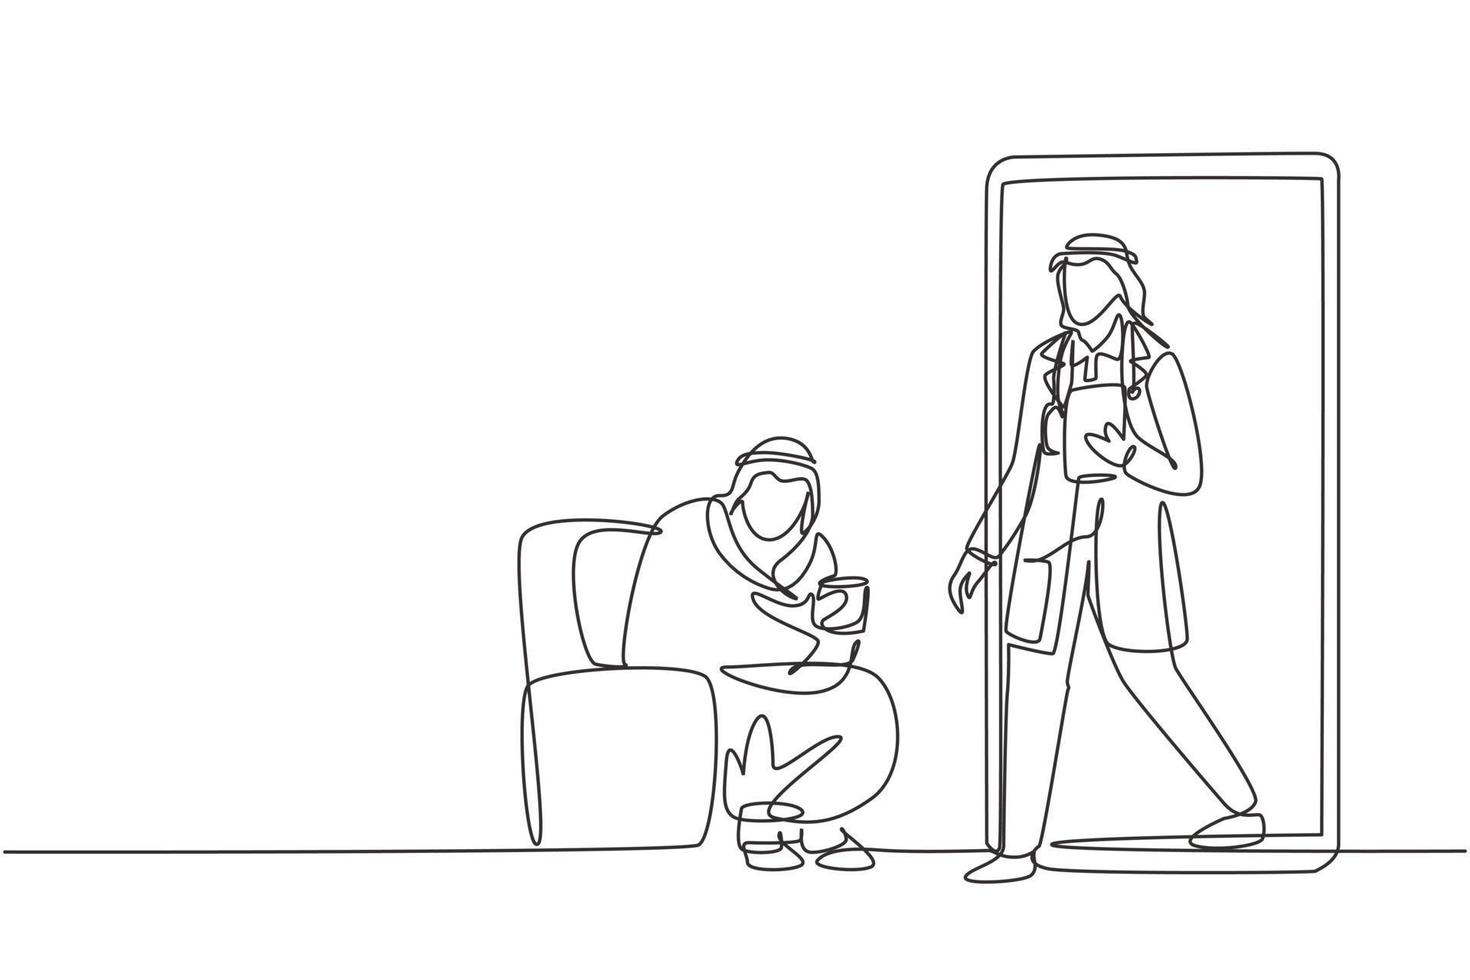 Single one line drawing Arabian male patient sitting curled up on sofa, using blanket, holding mug and there is male doctor walking out of smartphone, holding clipboard. Modern continuous line draw vector